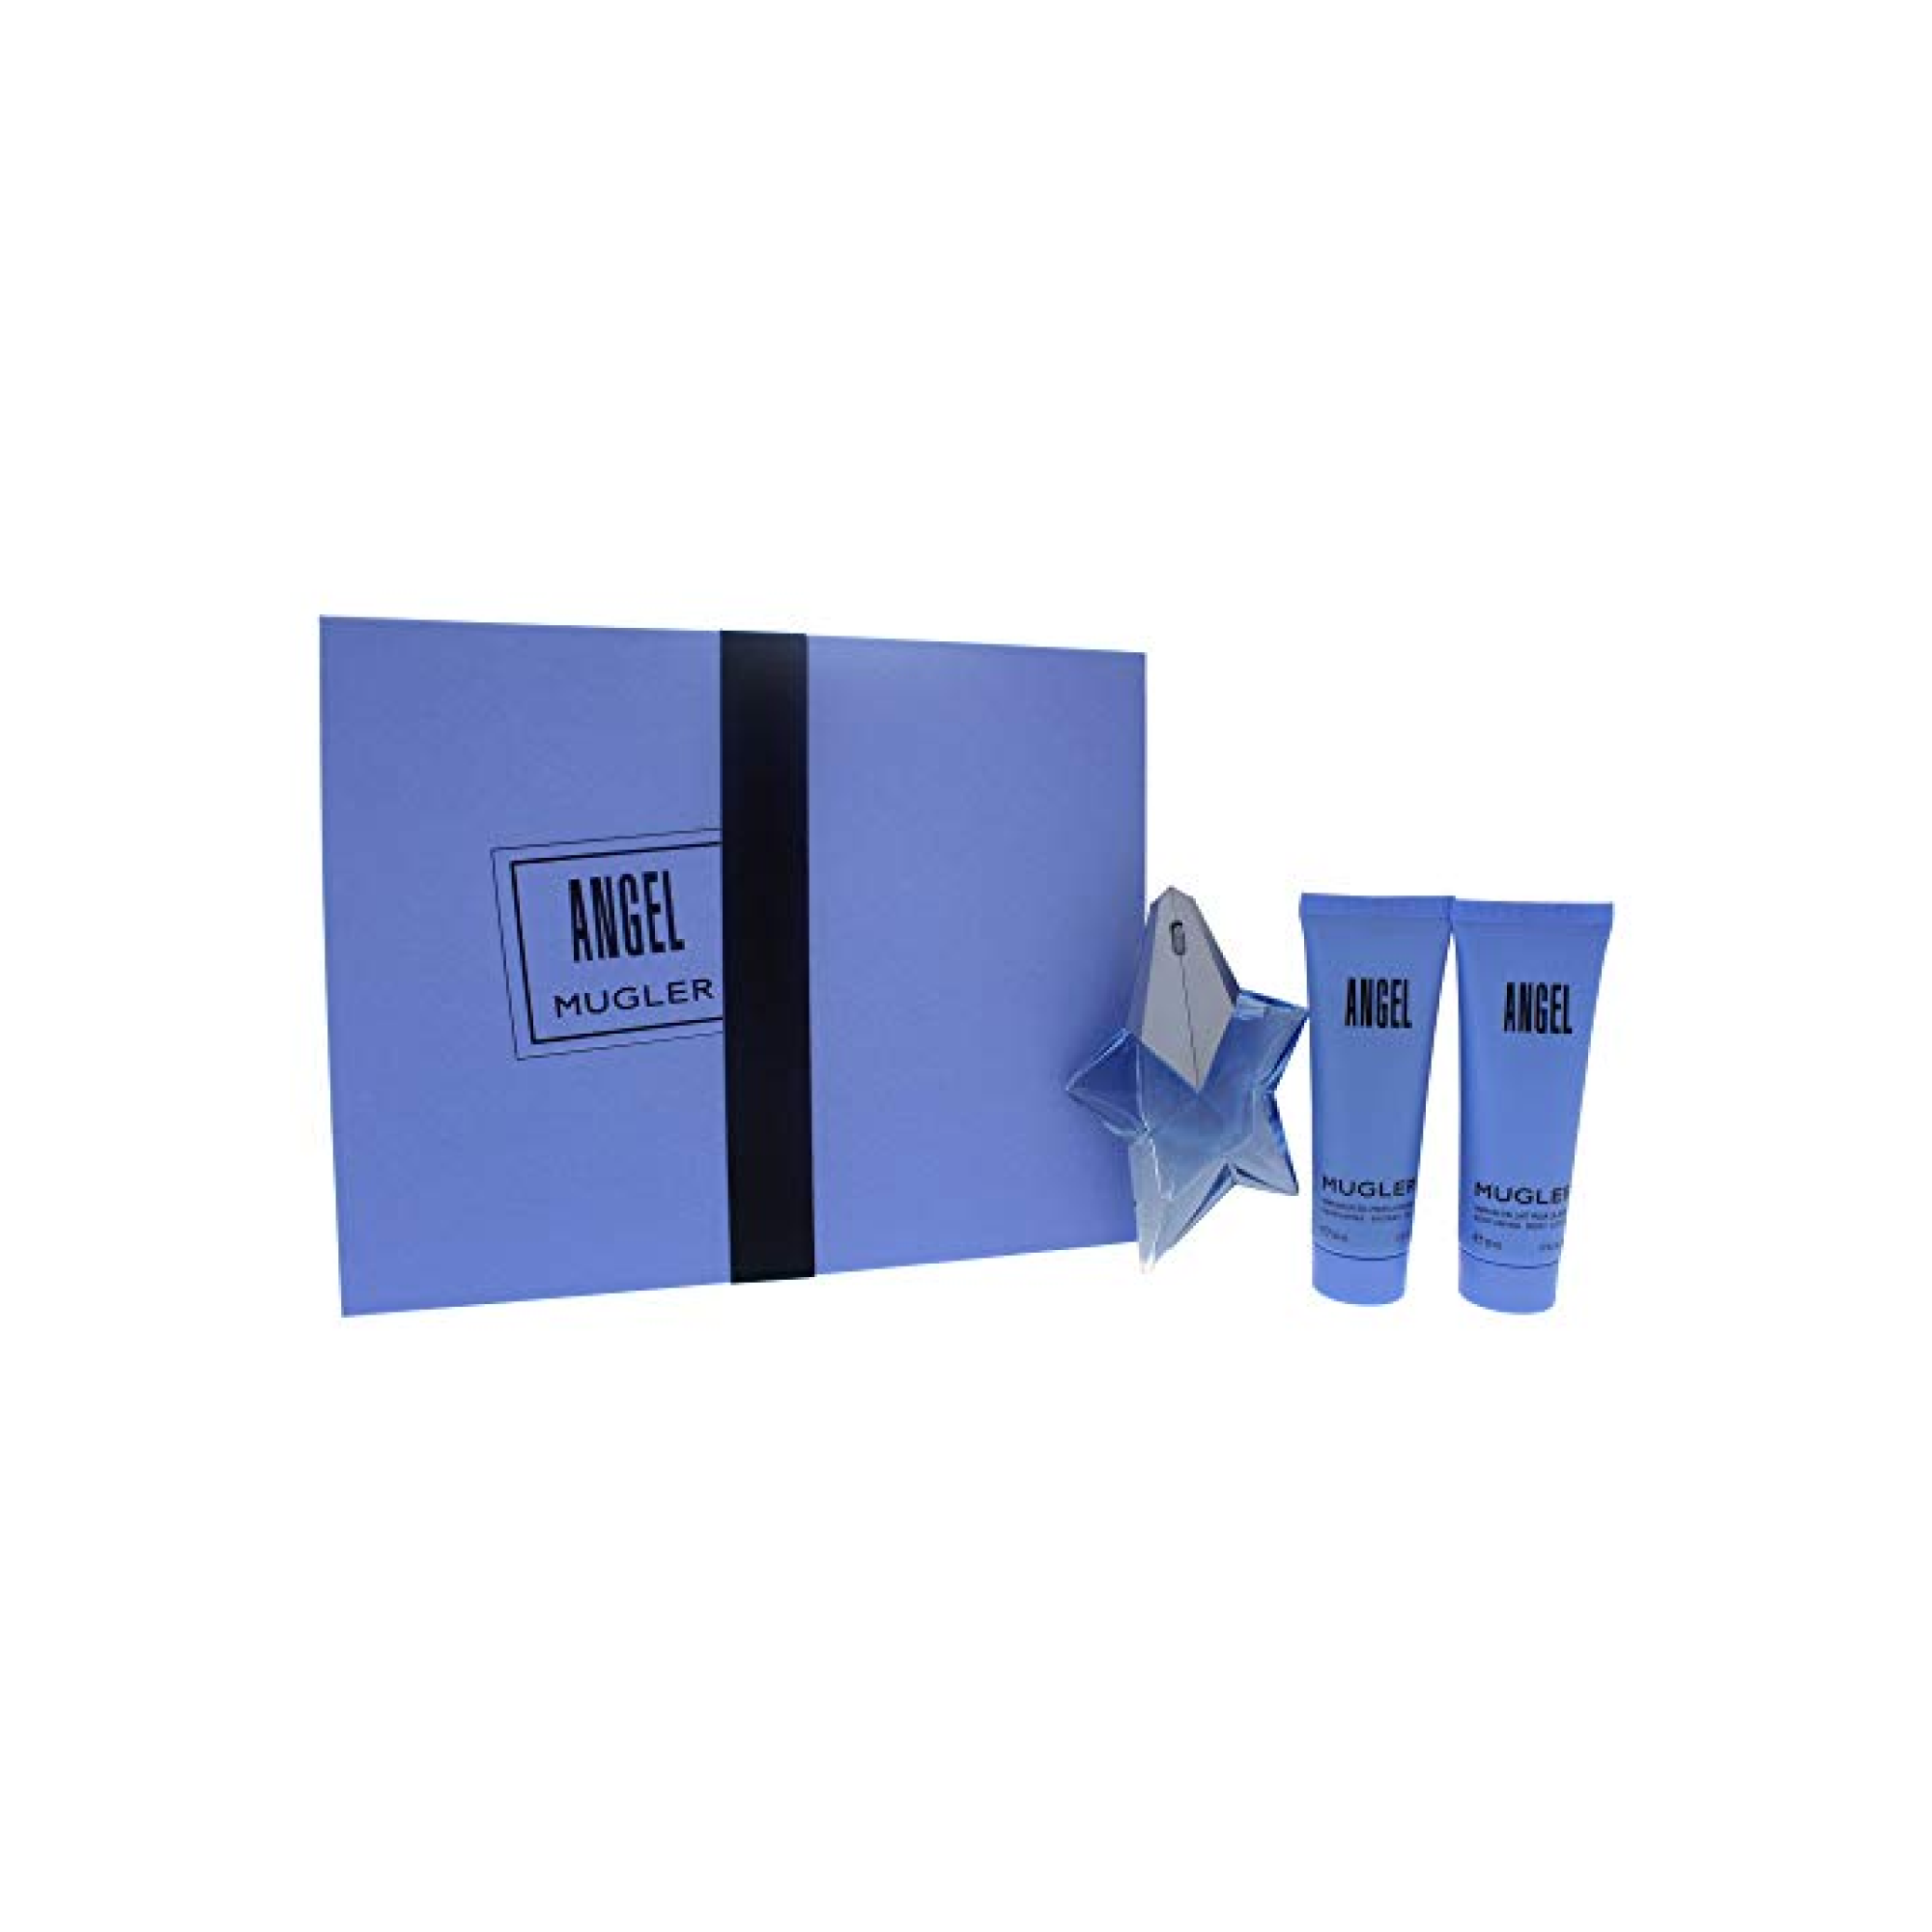 Angel gift set (including Thierry Mugler pouch)